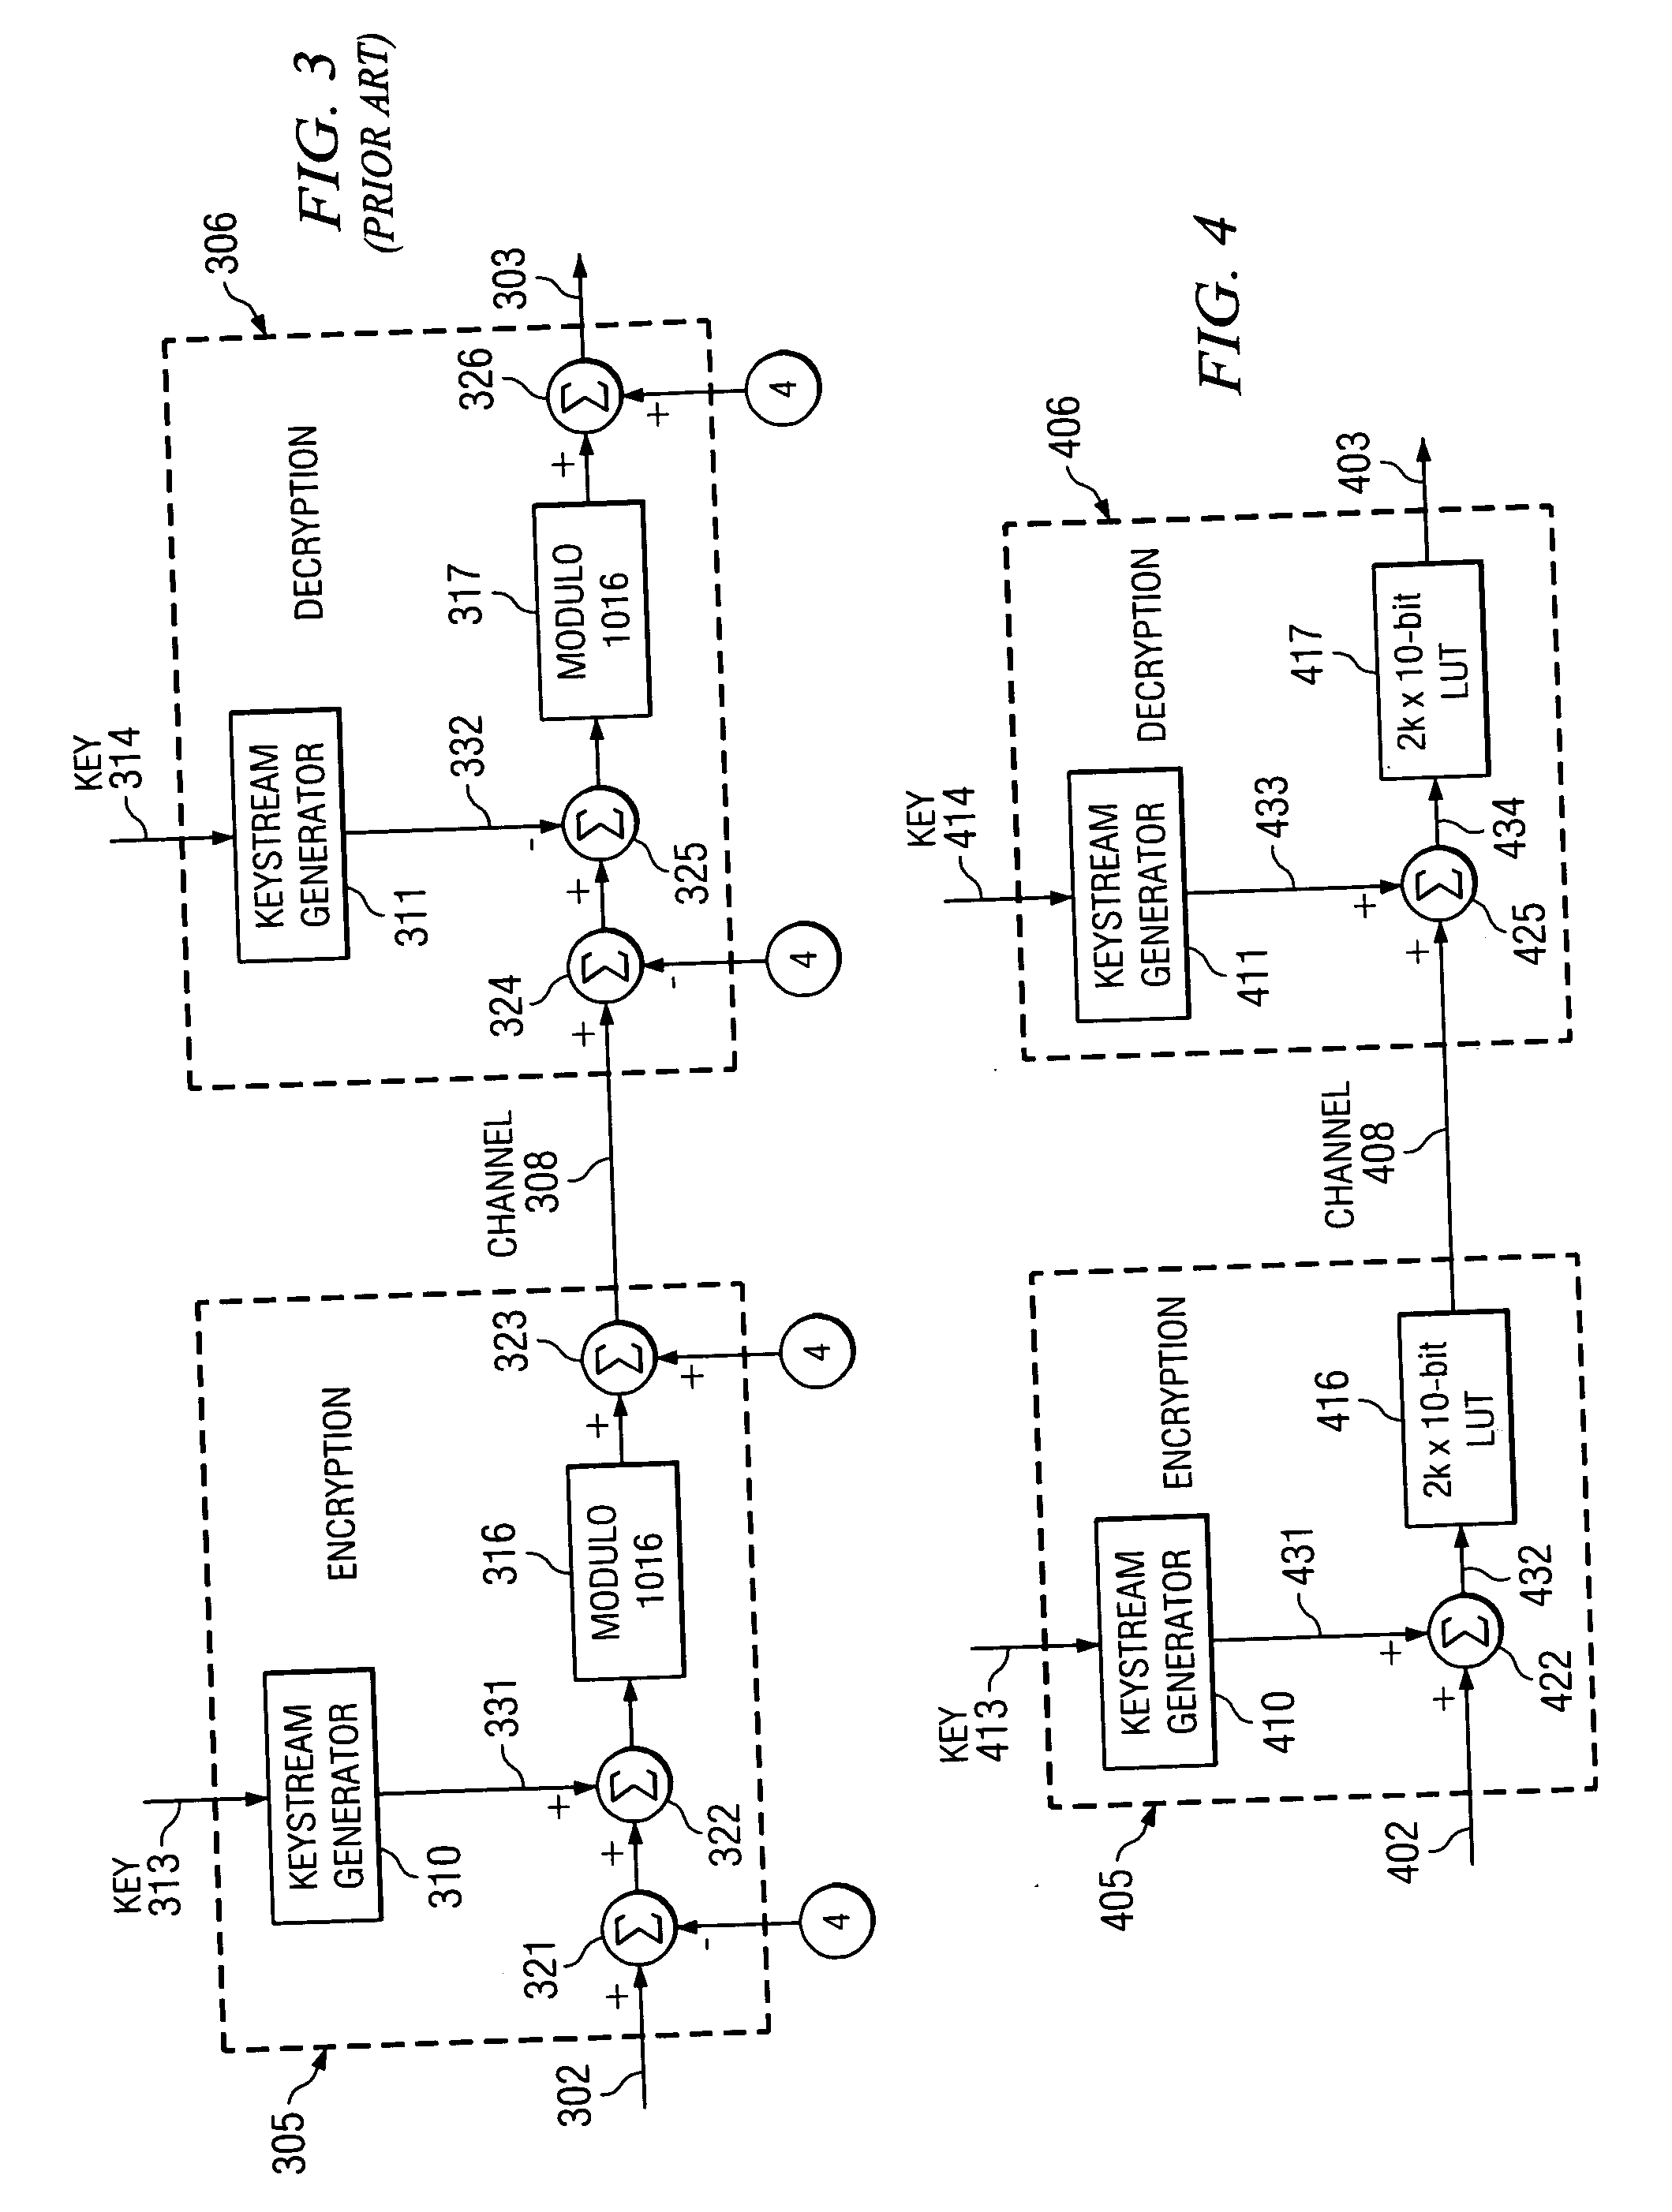 Method and apparatus for synchronous stream cipher encryption with reserved codes